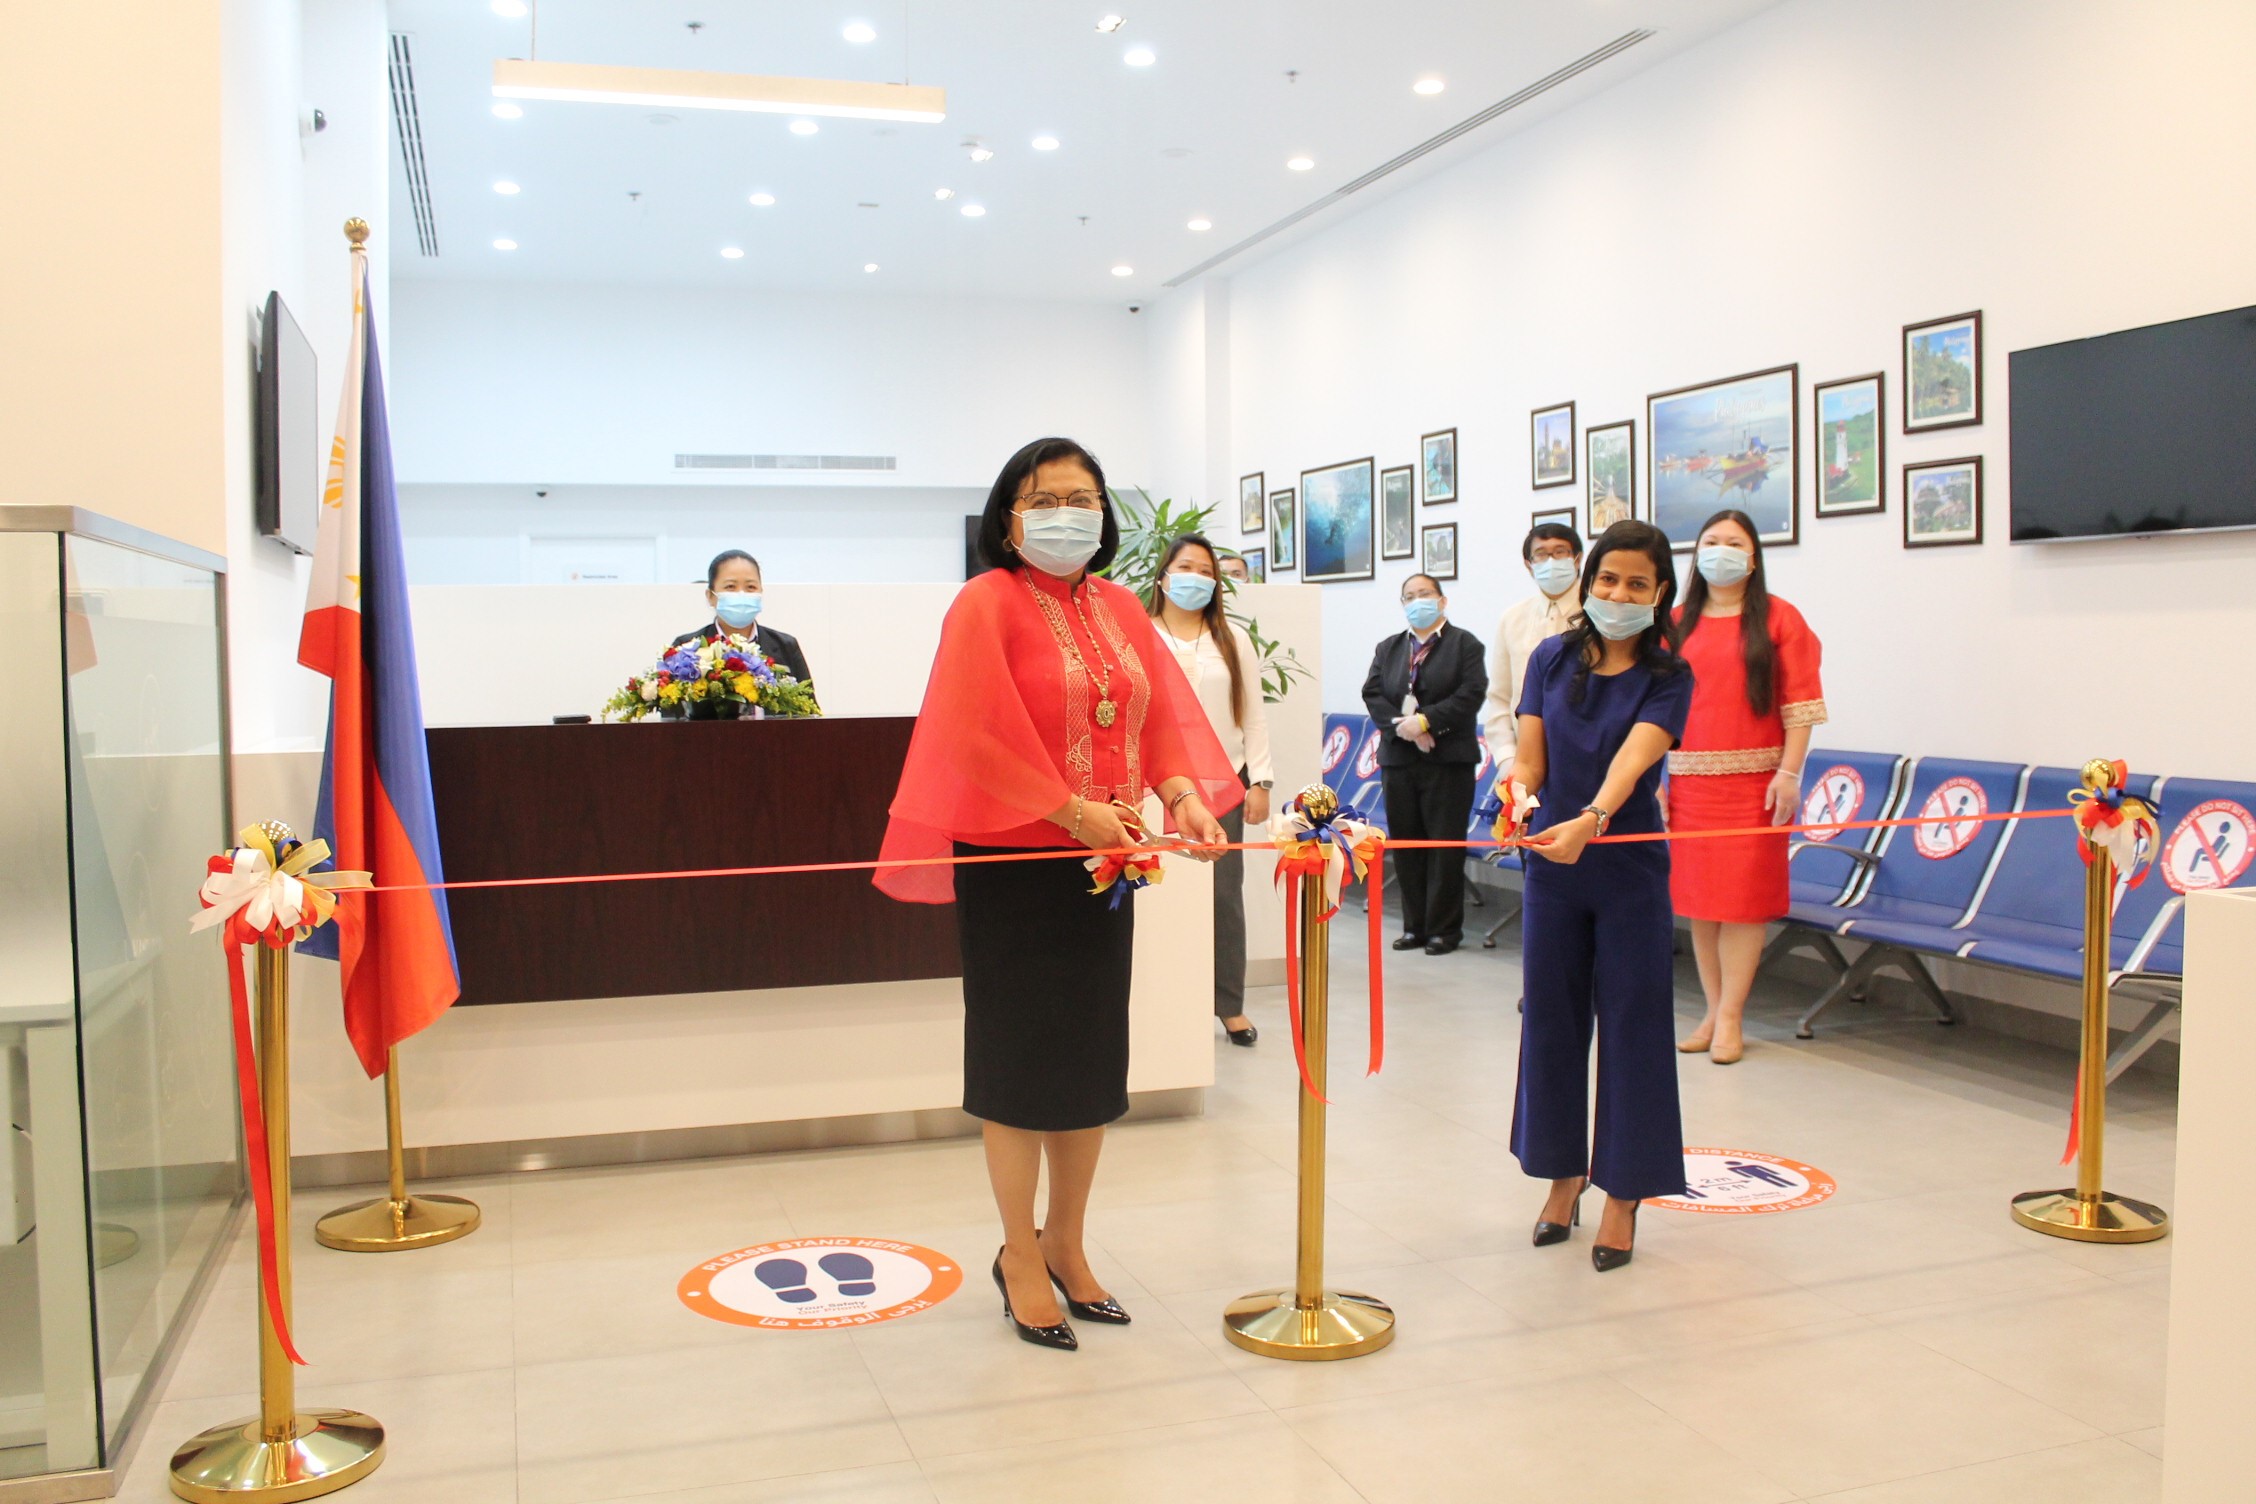 Philippine Ambassador Leads Inauguration Of Passport Renewal Facility In Abu Dhabi On Philippine Independence Day